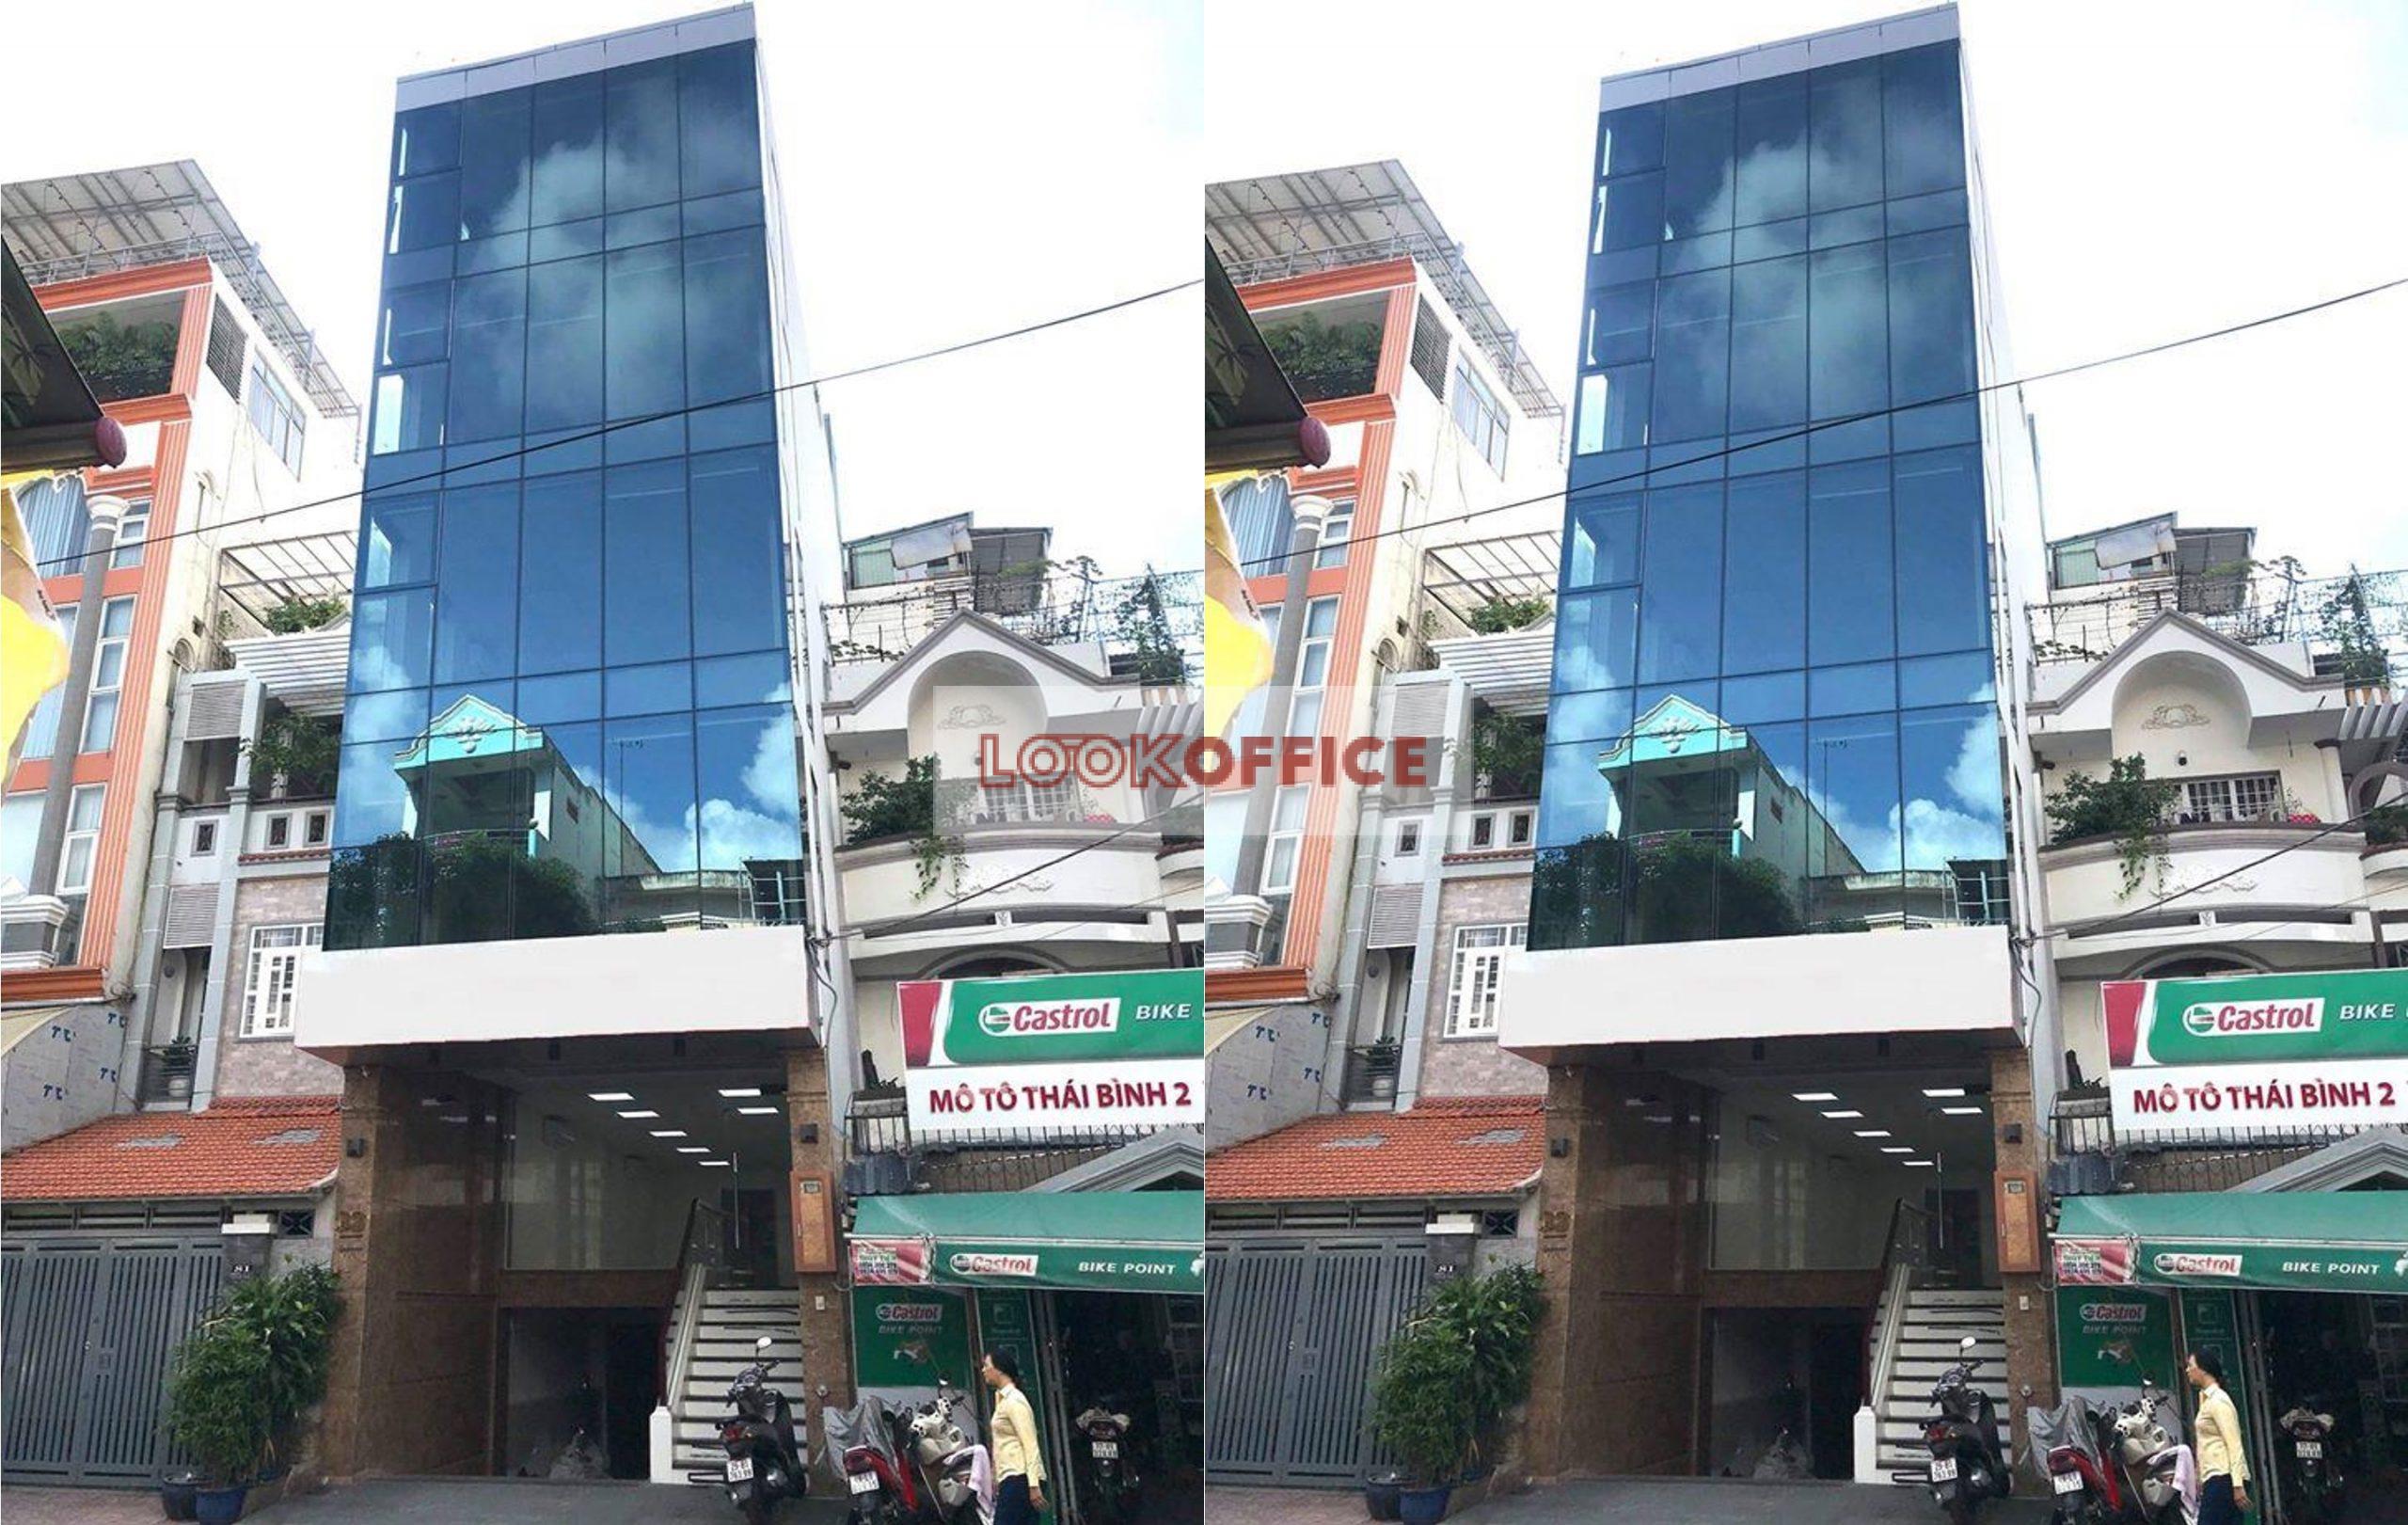 hhp building office for lease for rent in tan binh ho chi minh